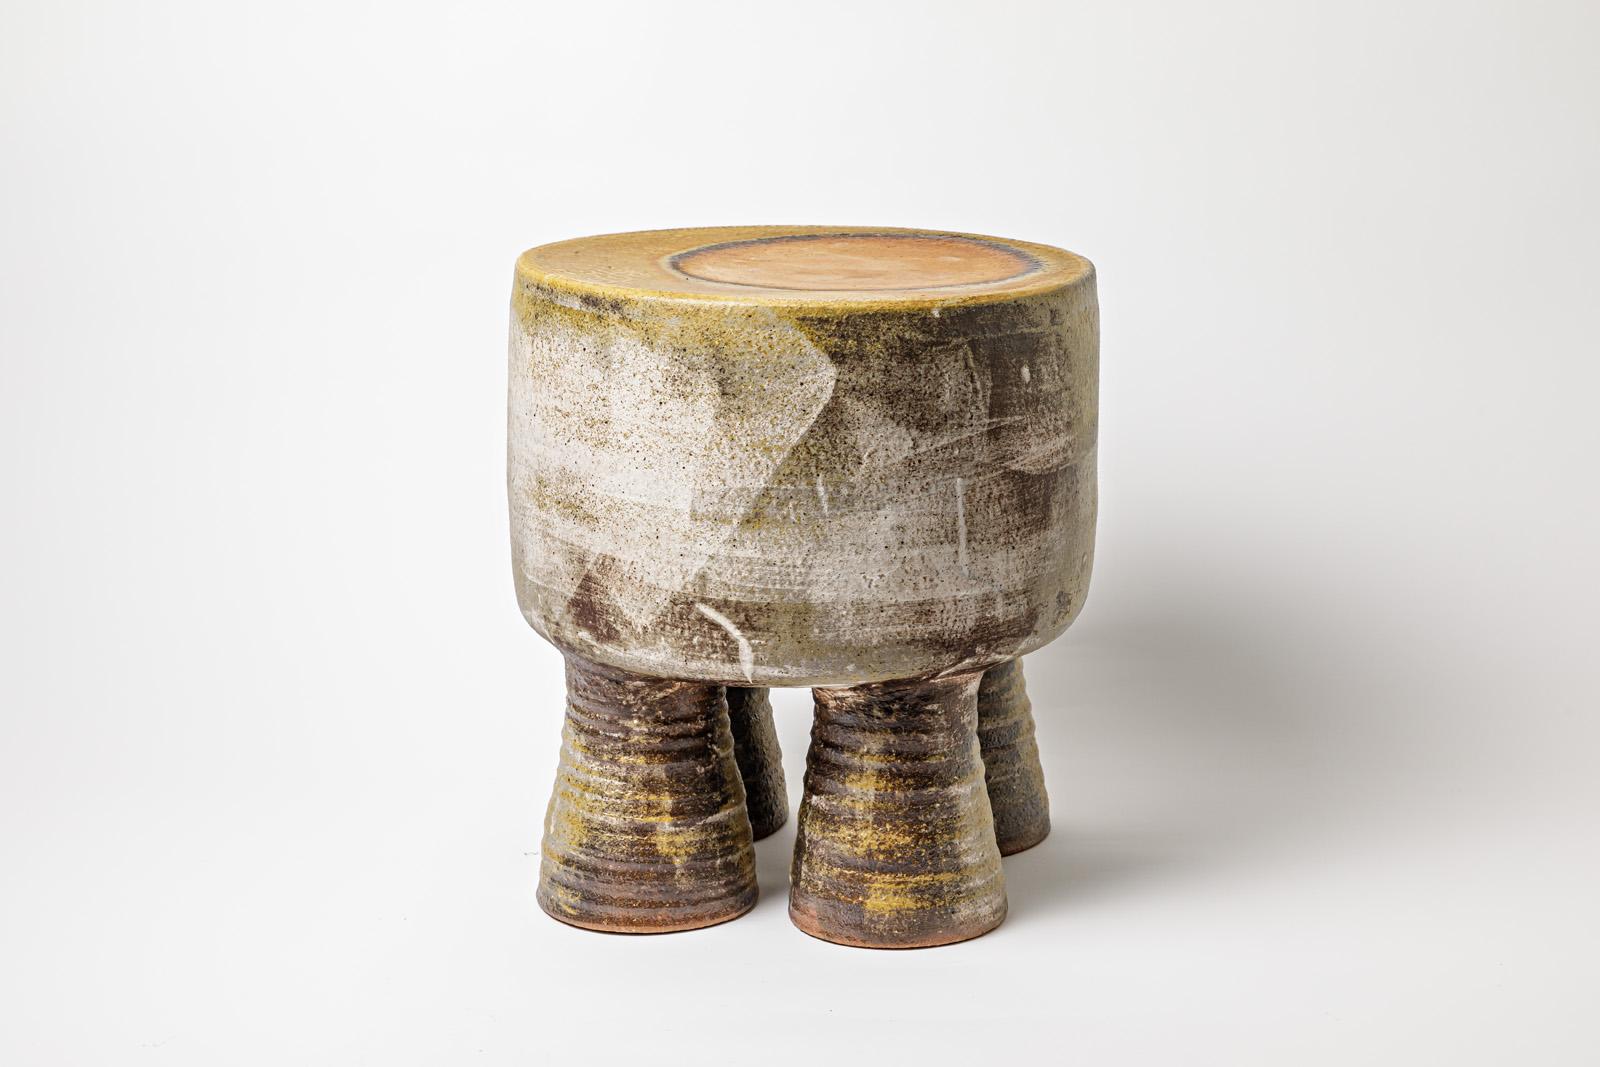 Beaux Arts Wood Fired Ceramic Stool or Coffee Table by Mia Jensen, 2023